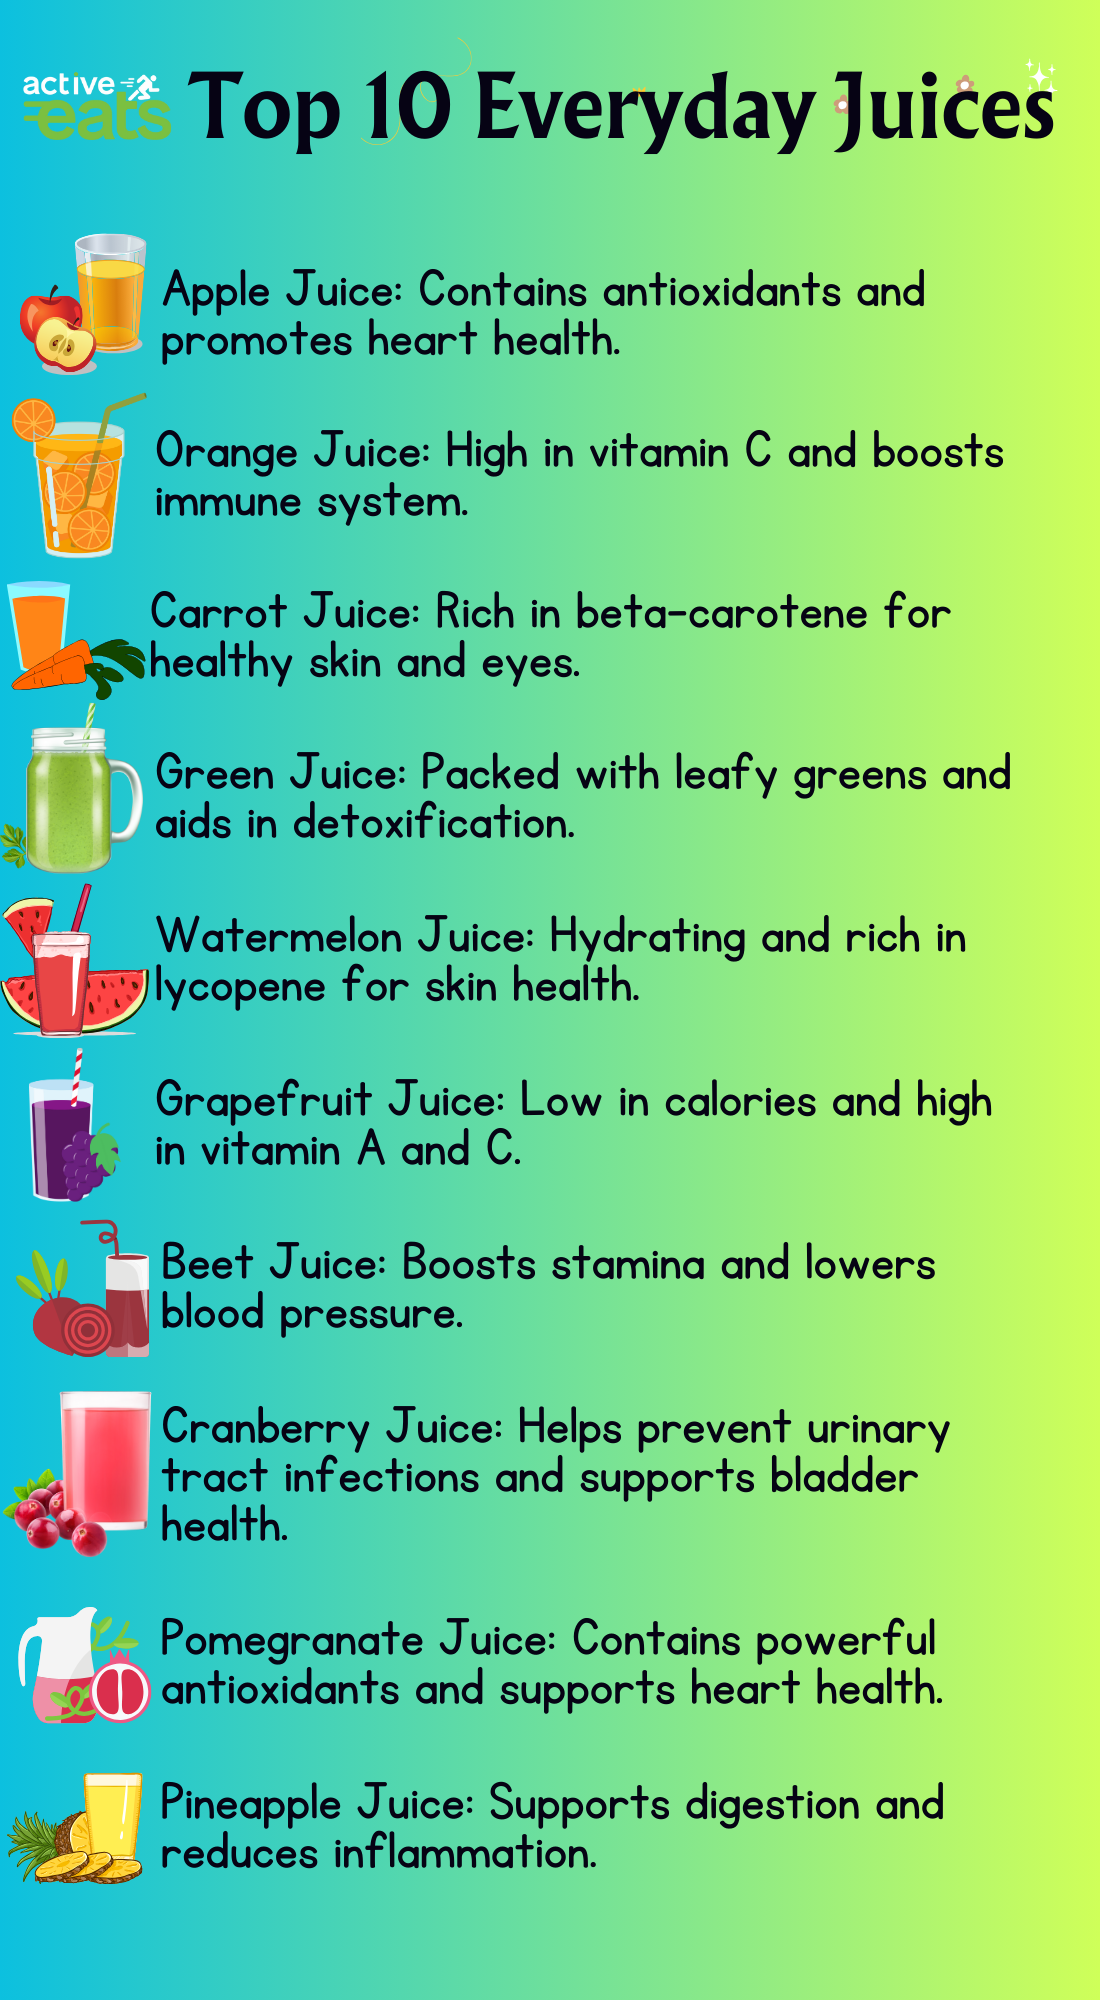 A variety of juices can contribute to a healthy body, but it's essential to balance them with a diverse diet. Here are ten everyday juices to consider: Orange Juice: High in vitamin C and antioxidants. Apple Juice: Rich in phytonutrients and fiber. Carrot Juice: Packed with vitamin A and beta-carotene. Beetroot Juice: May support heart health and provide essential nutrients. Green Juice: A blend of leafy greens, cucumbers, and celery, offering a range of vitamins and minerals. Pomegranate Juice: Known for its high levels of antioxidants. Ginger Juice: May aid digestion and reduce inflammation. Lemon Water: Promotes hydration and vitamin C intake. Cranberry Juice: Supports urinary tract health. Tomato Juice: Rich in lycopene, which can have various health benefits.